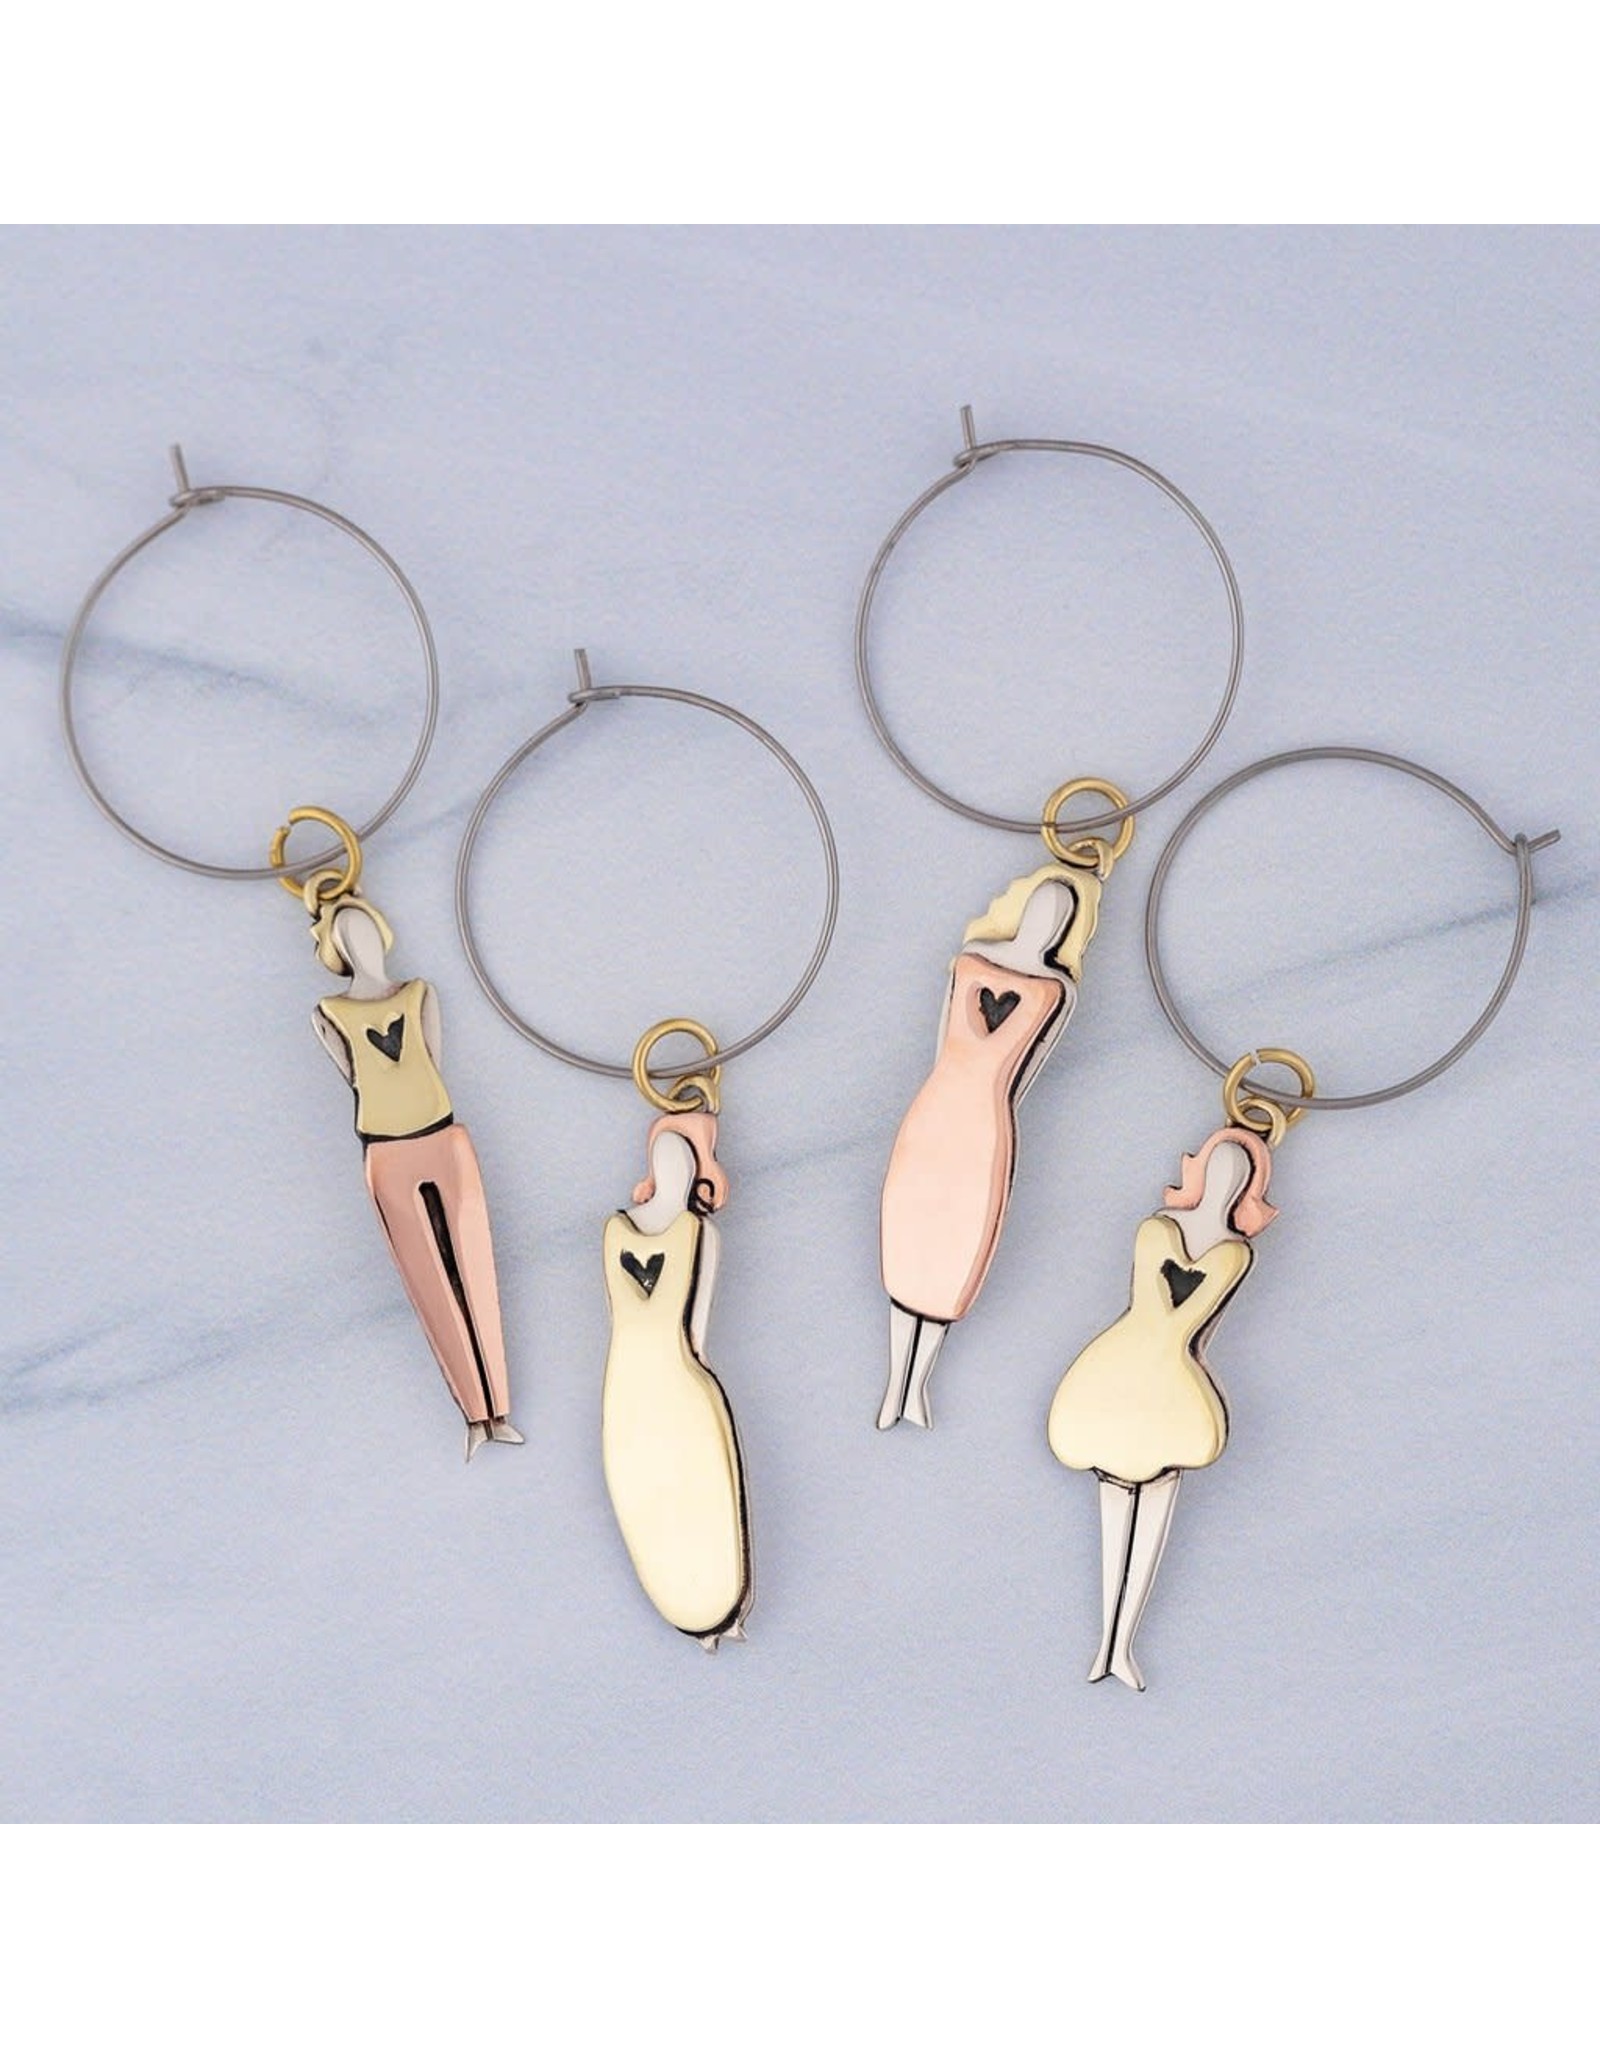 Four Friends/Sisters Wine Charms